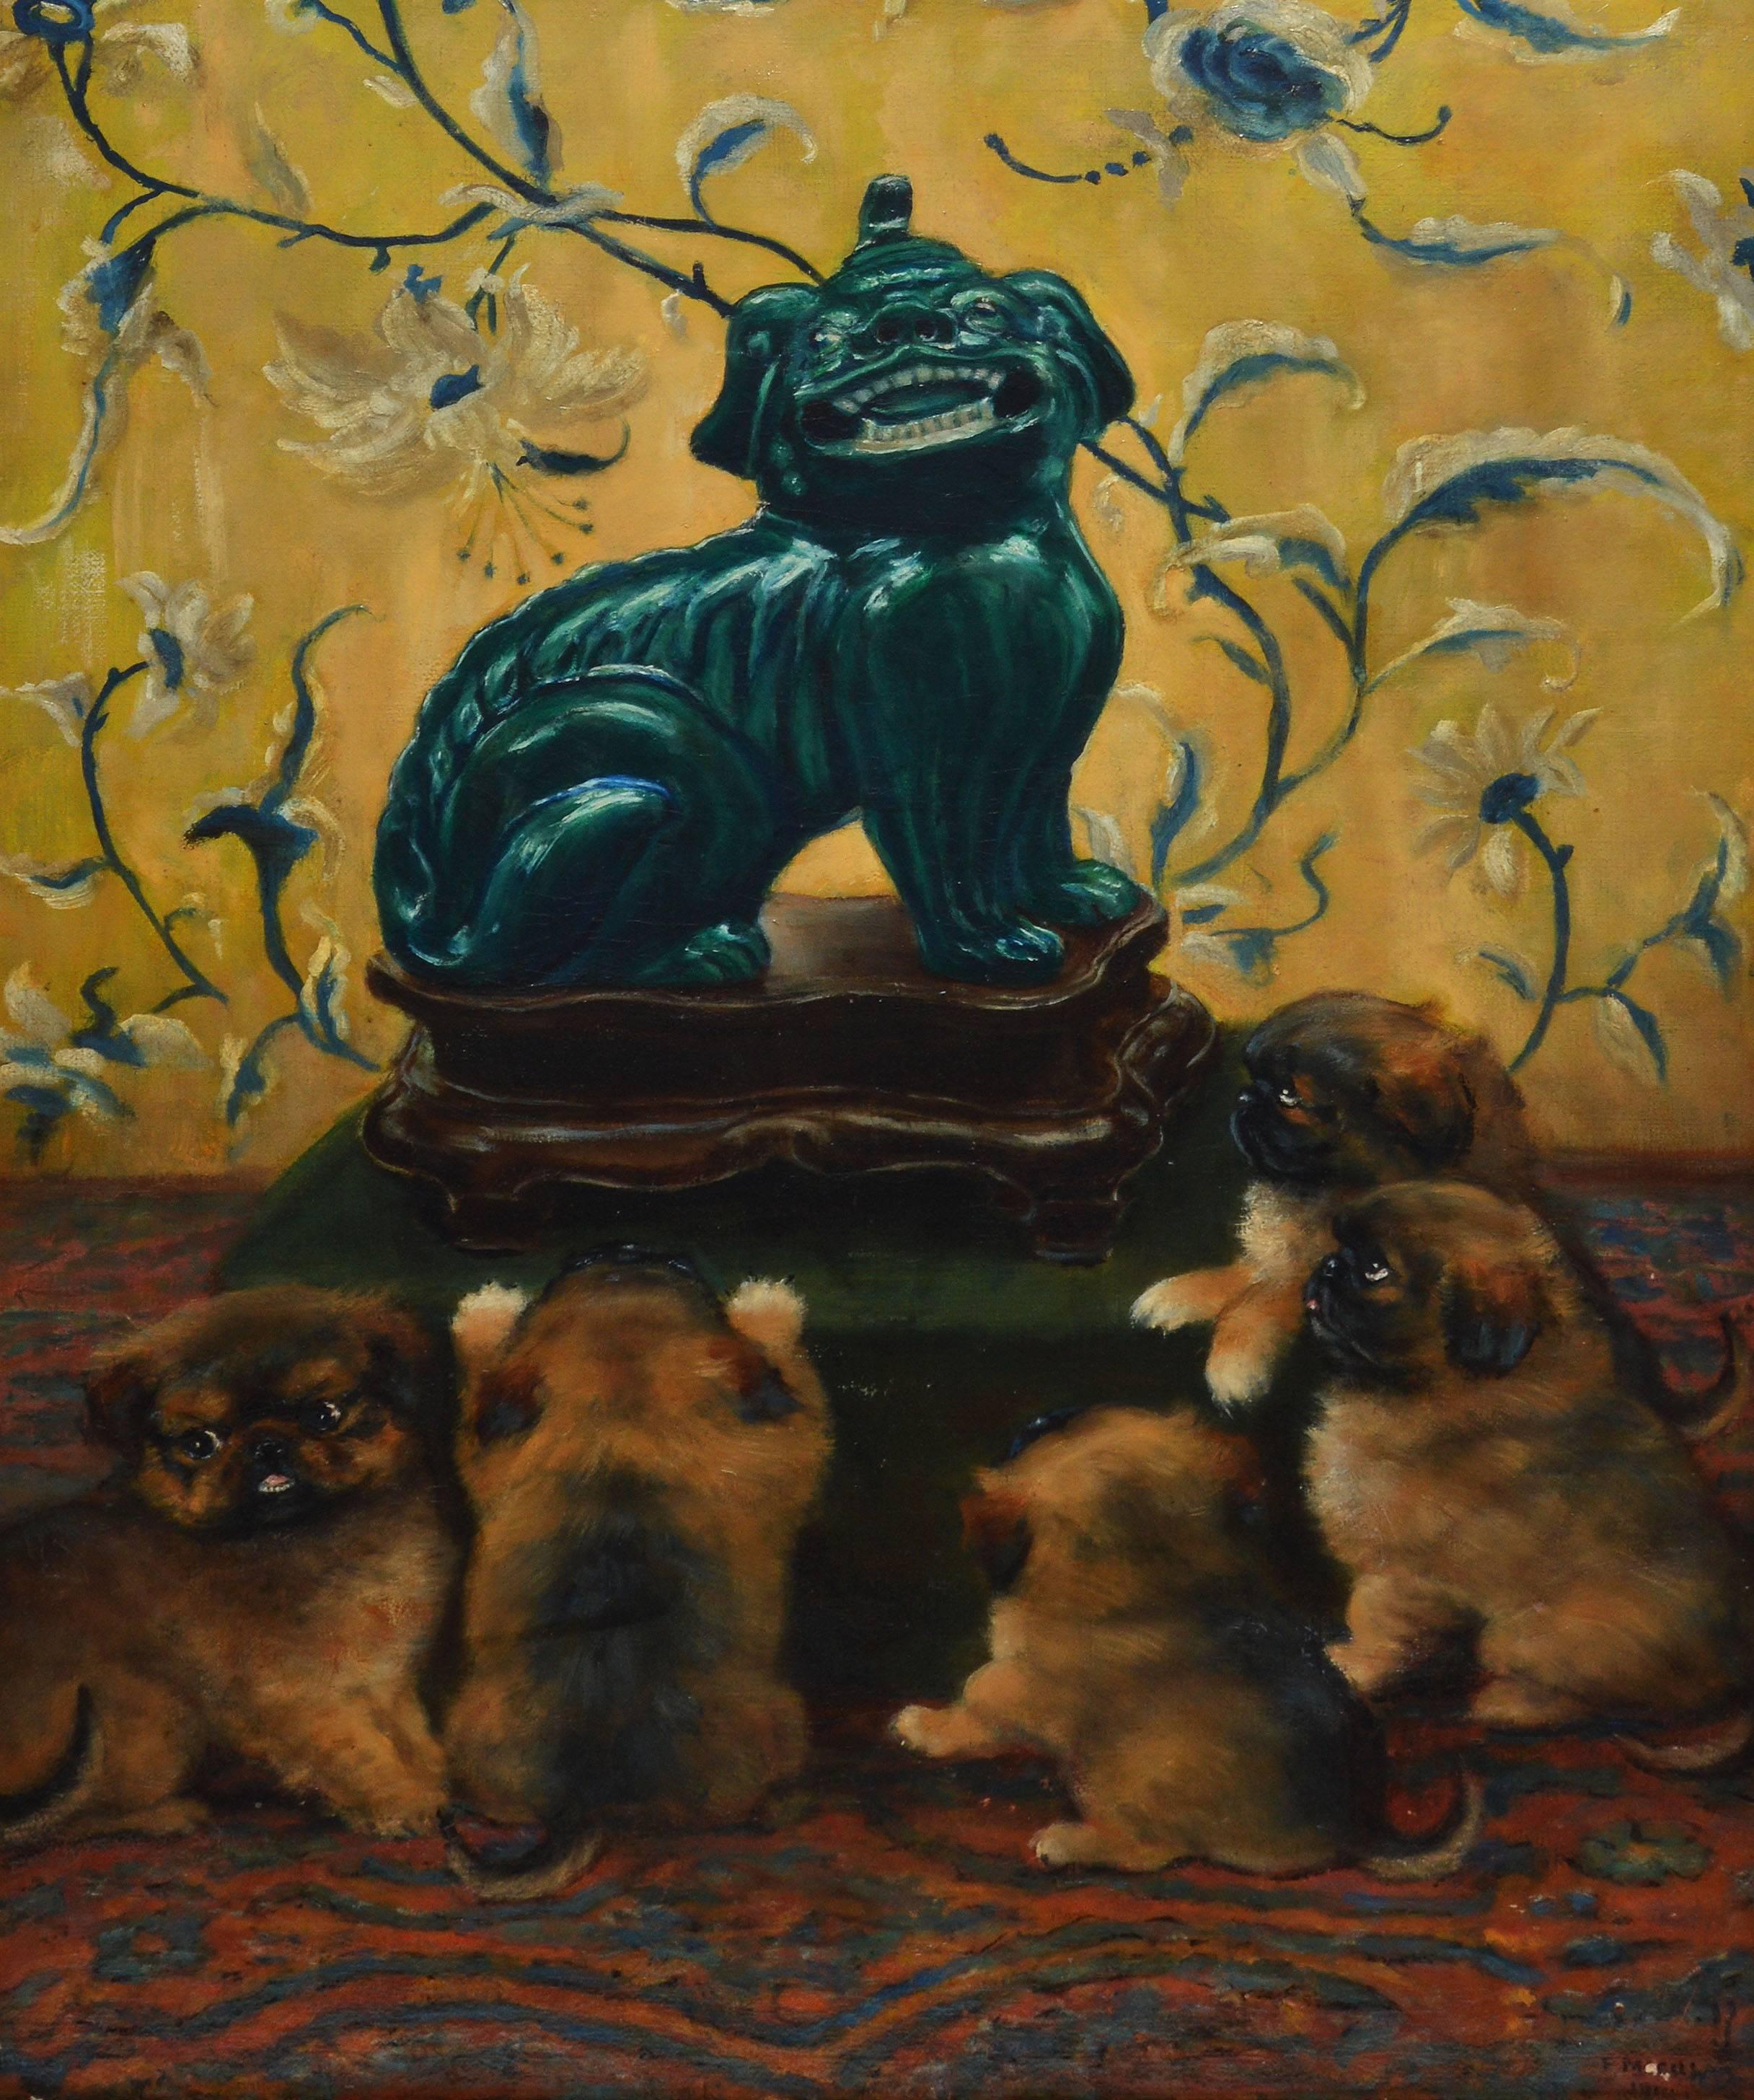 The Idol, Fu Dog Portrait  - Realist Painting by Unknown